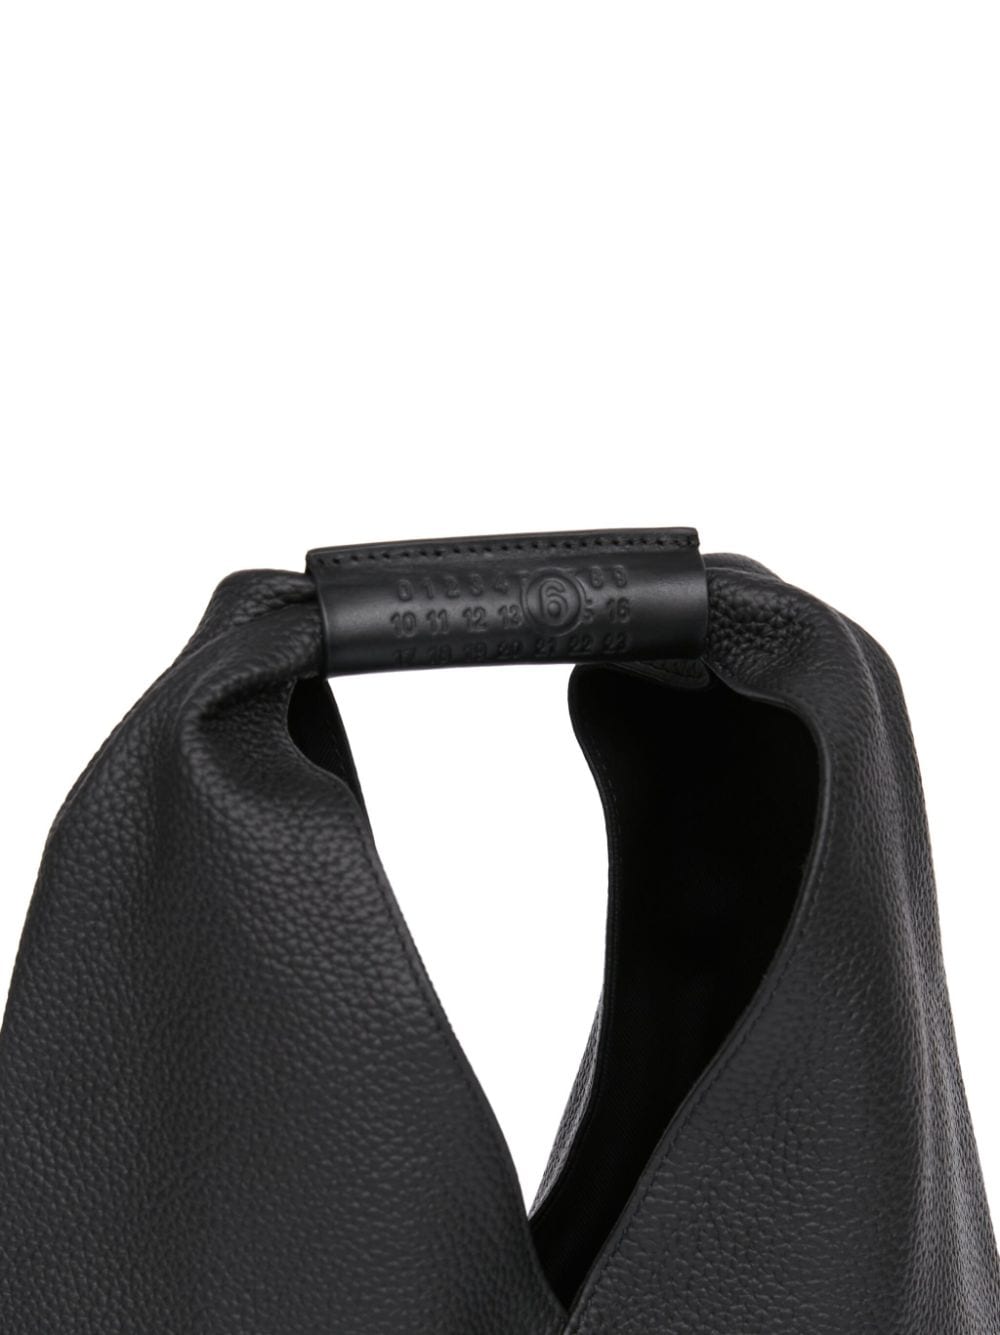 Black Small Classic Japanese tote bag